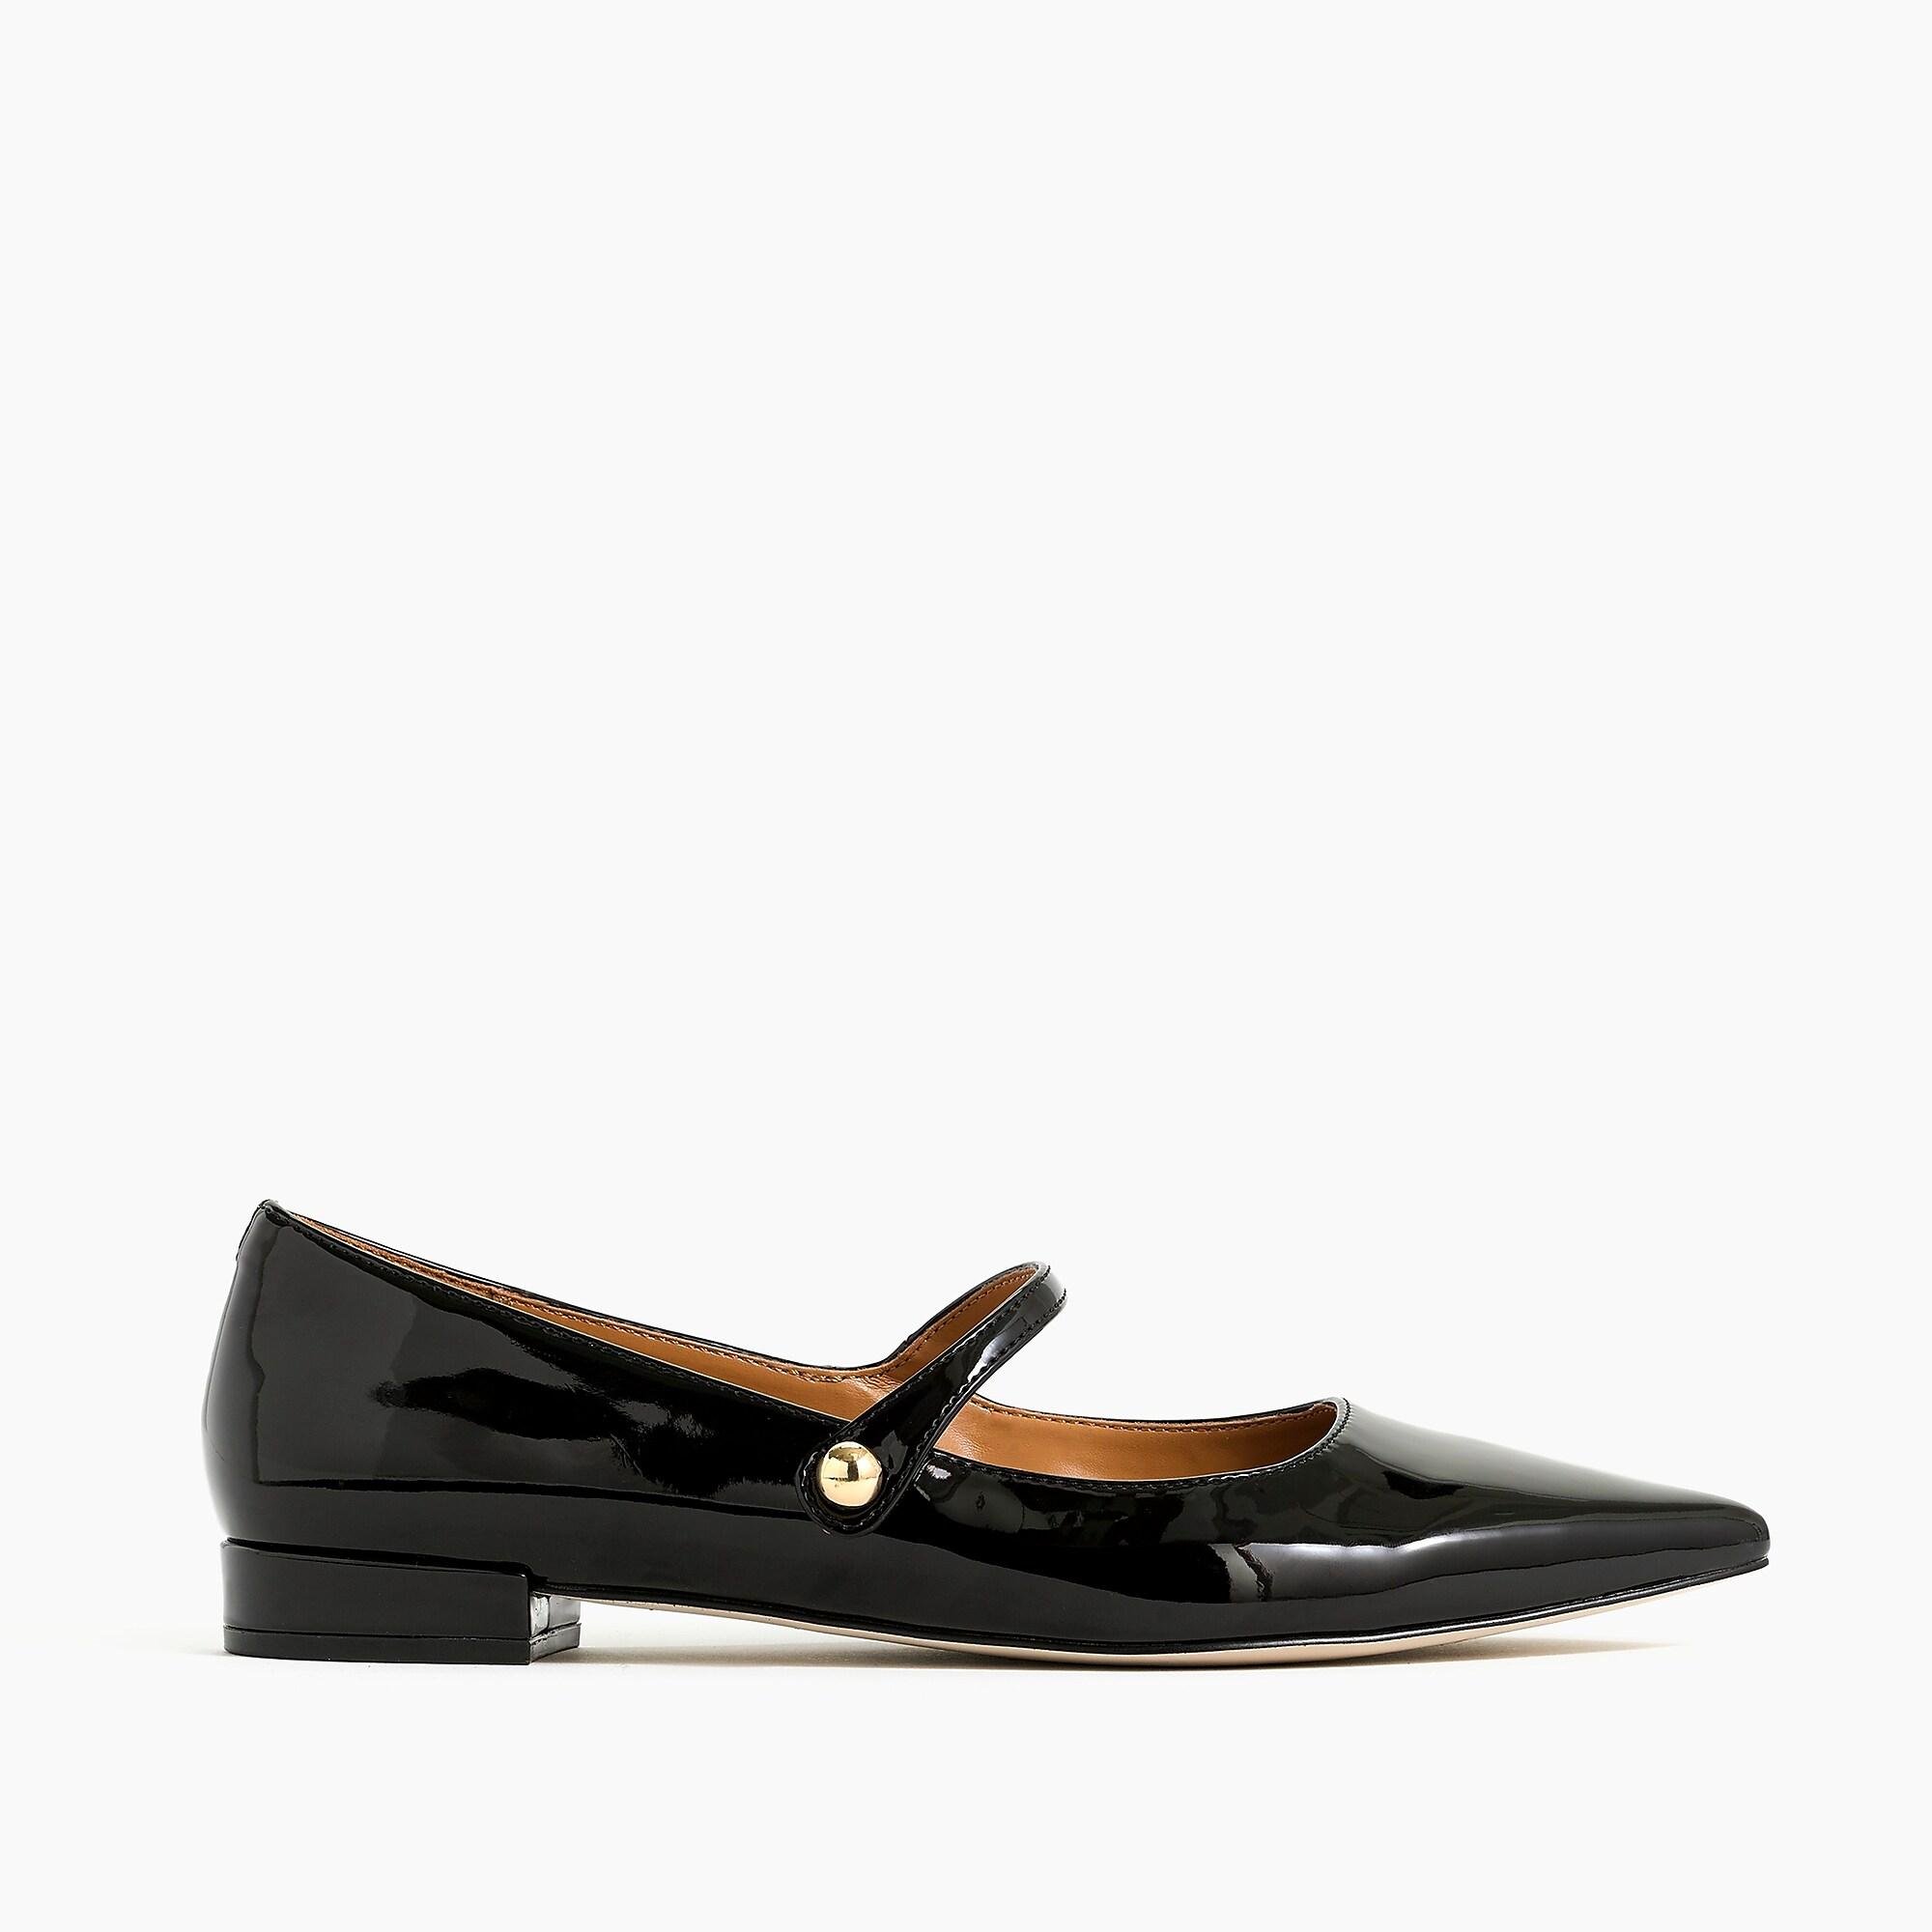 J.Crew Mary Jane Pointy-toe Flats in Black - Lyst